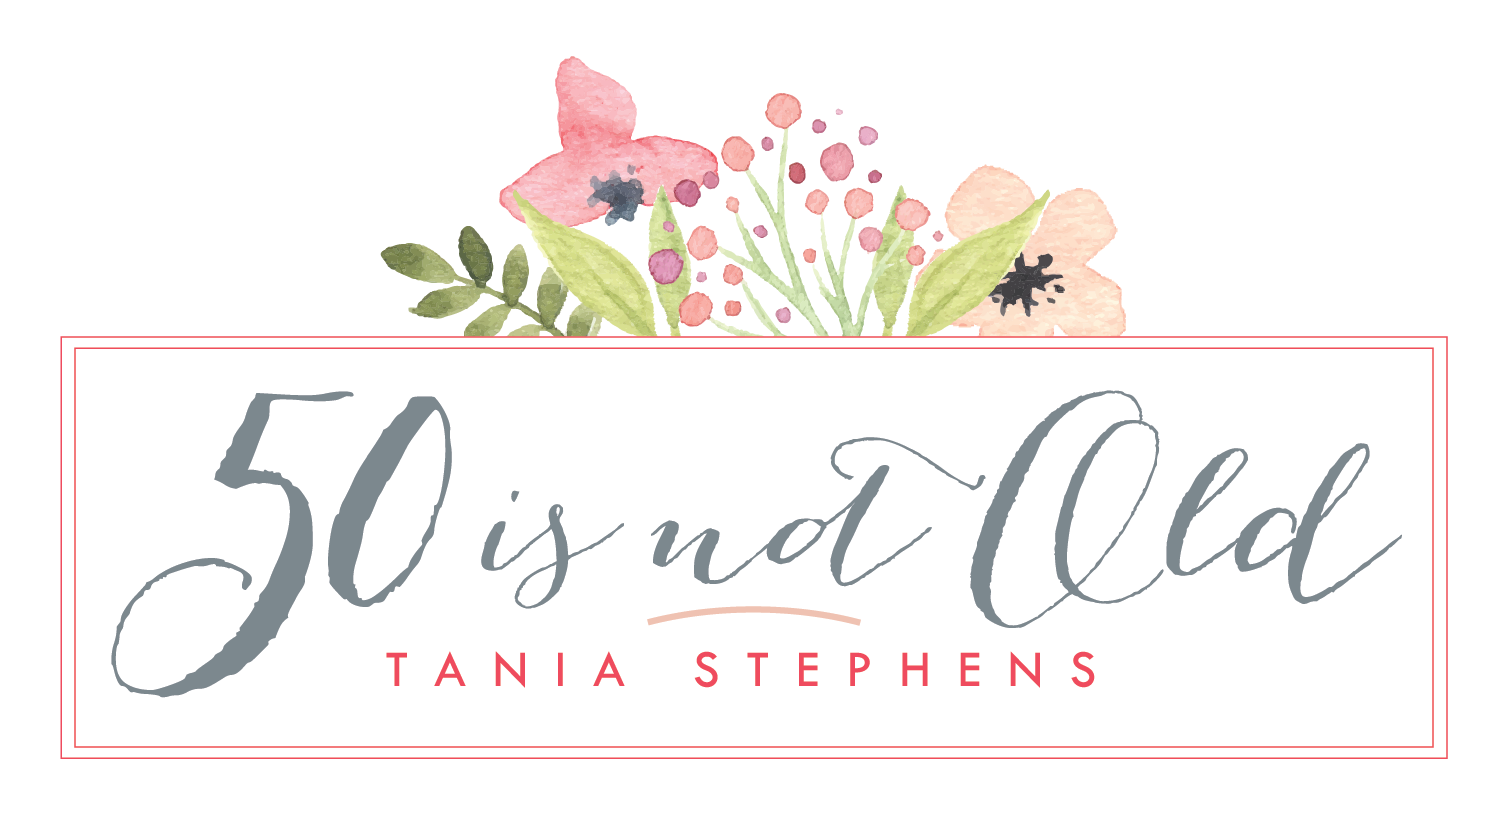 Blogger, Tania Stephens, 50 Is Not Old